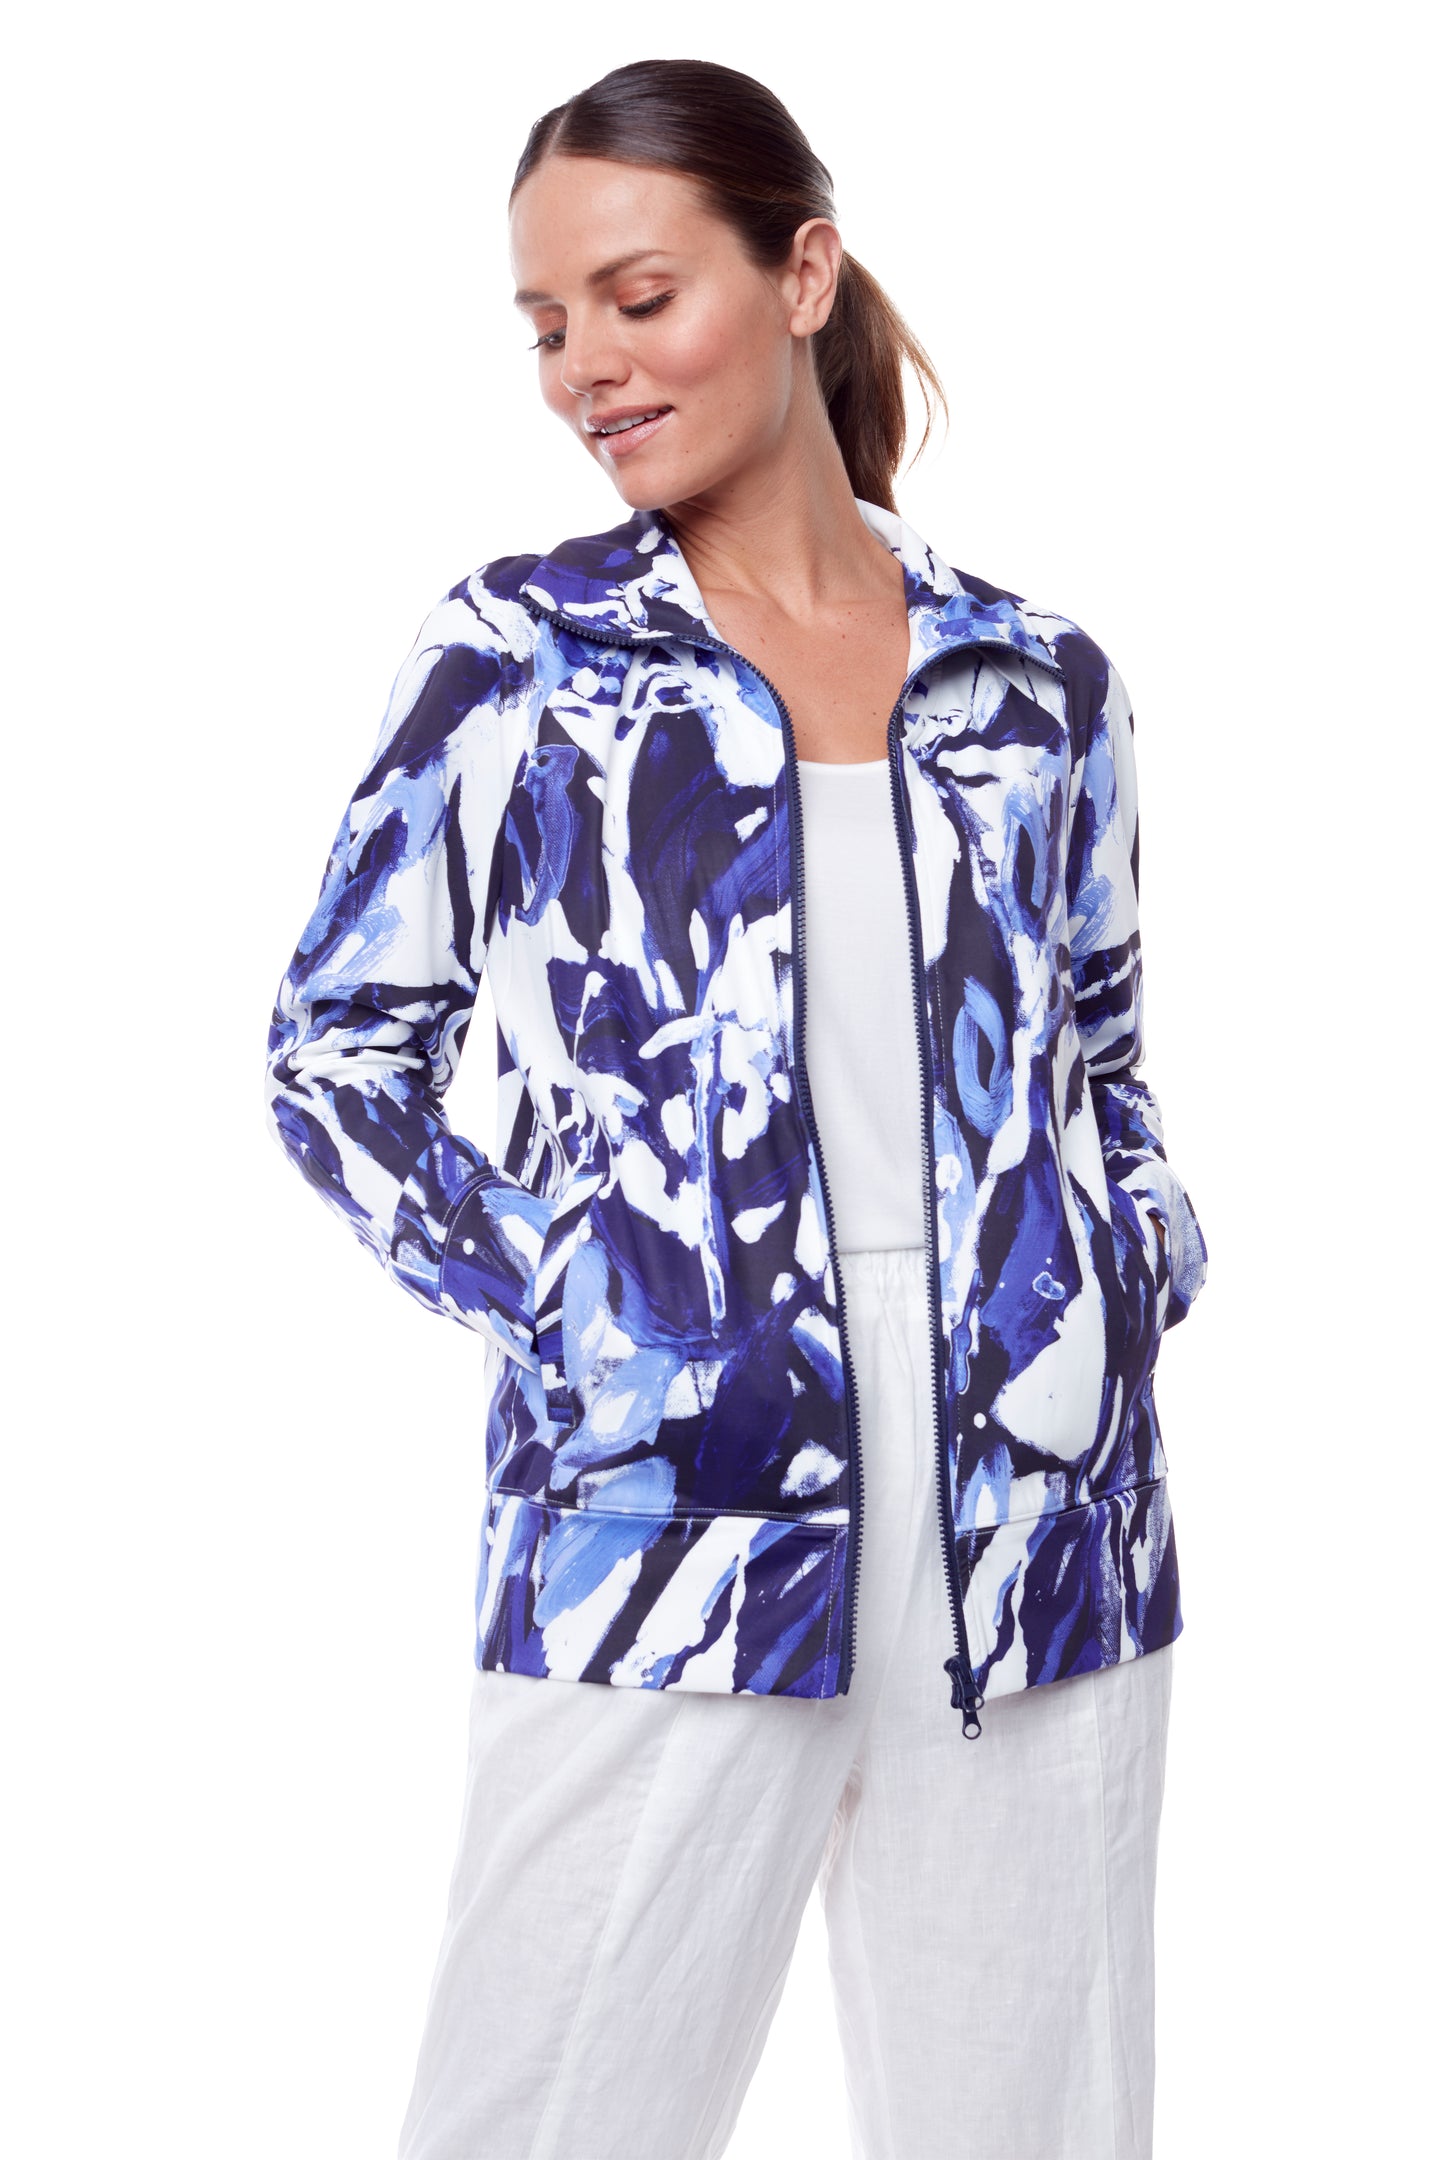 Blue & White: At Liberty in the Garden zip-front jacket